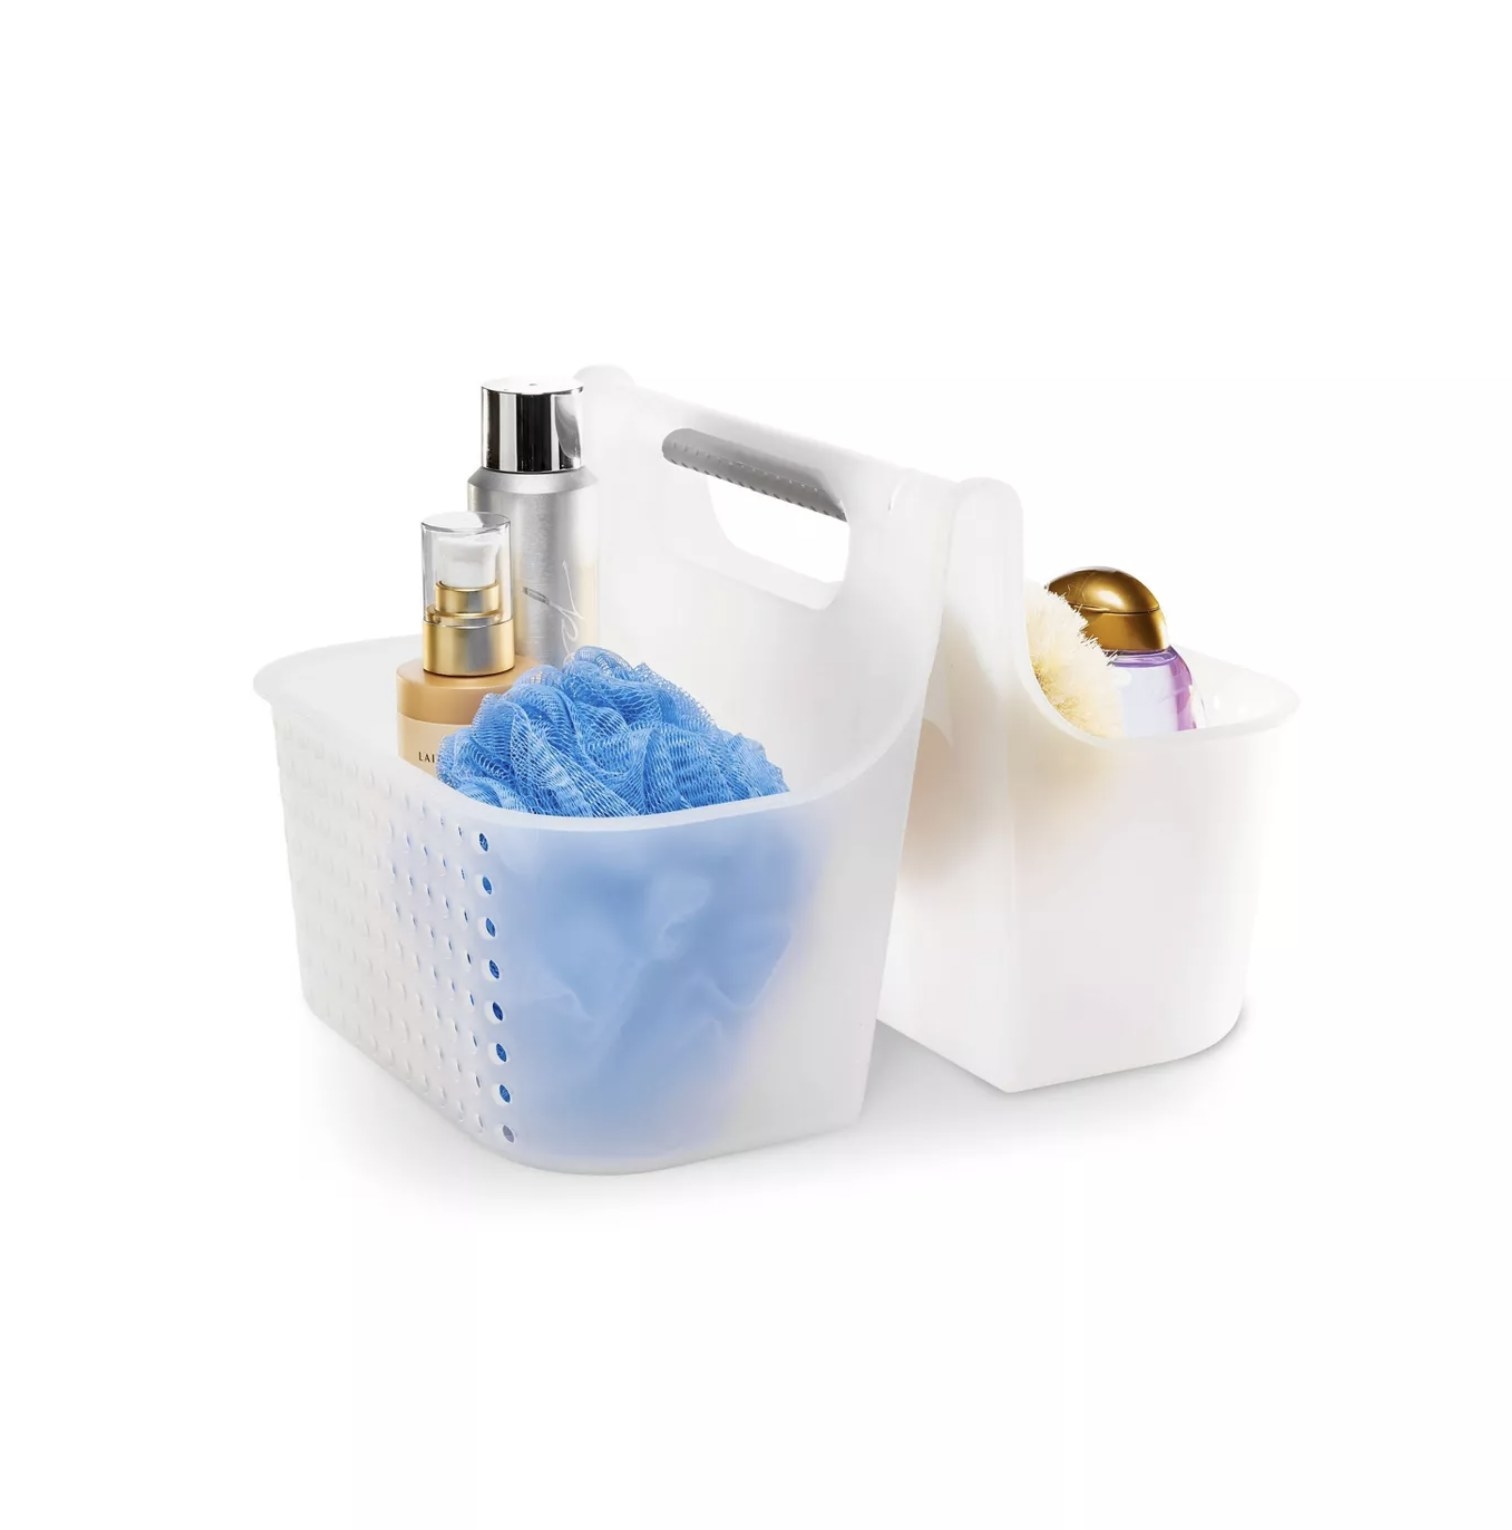 A caddy with a handle and two shelves to fit bottles and accessories 